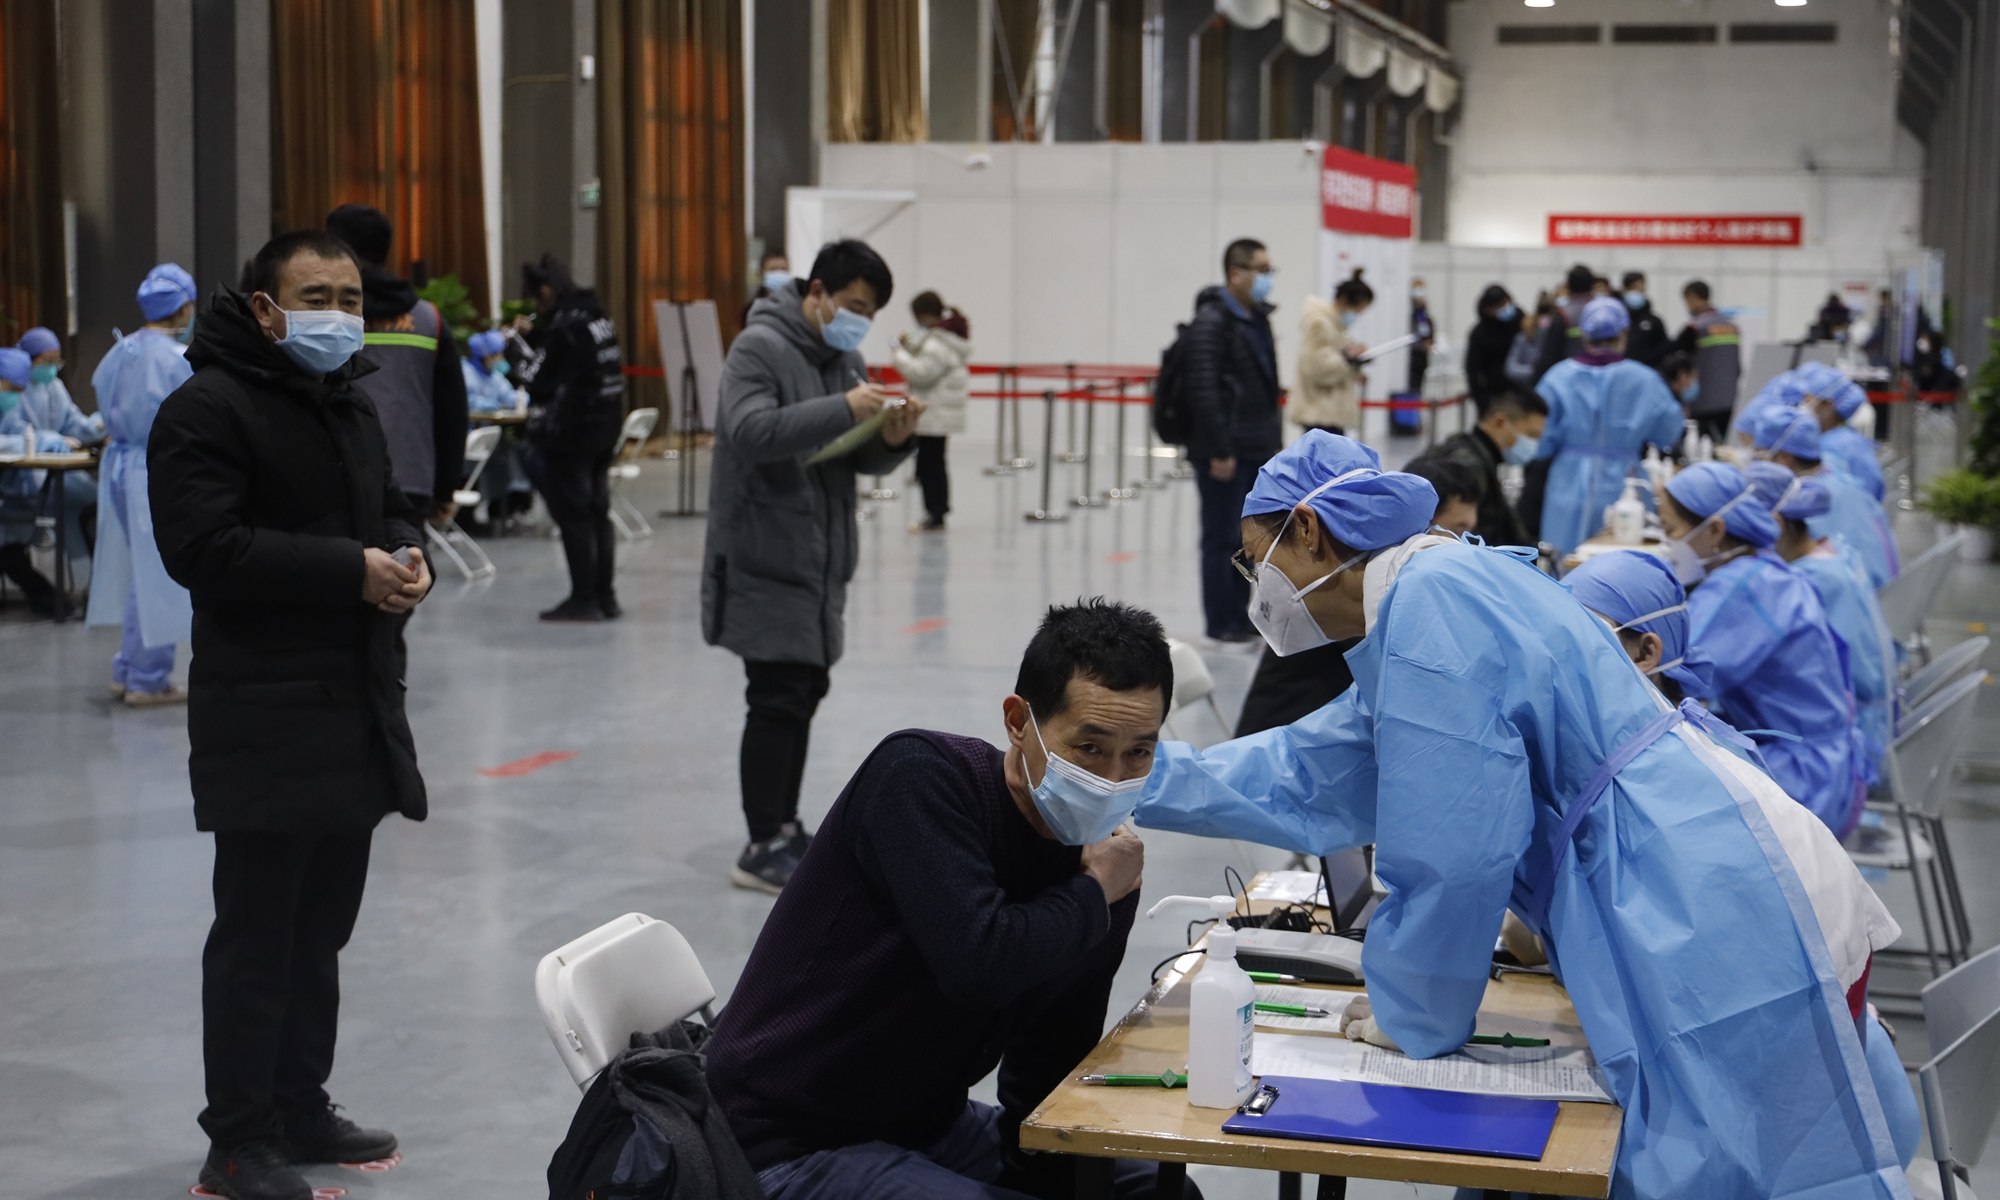 Medical workers check out people's health condition before vaccination at a temporary vaccination site in Chaoyang district, Beijing, on Monday. Photo: Li Hao/GT